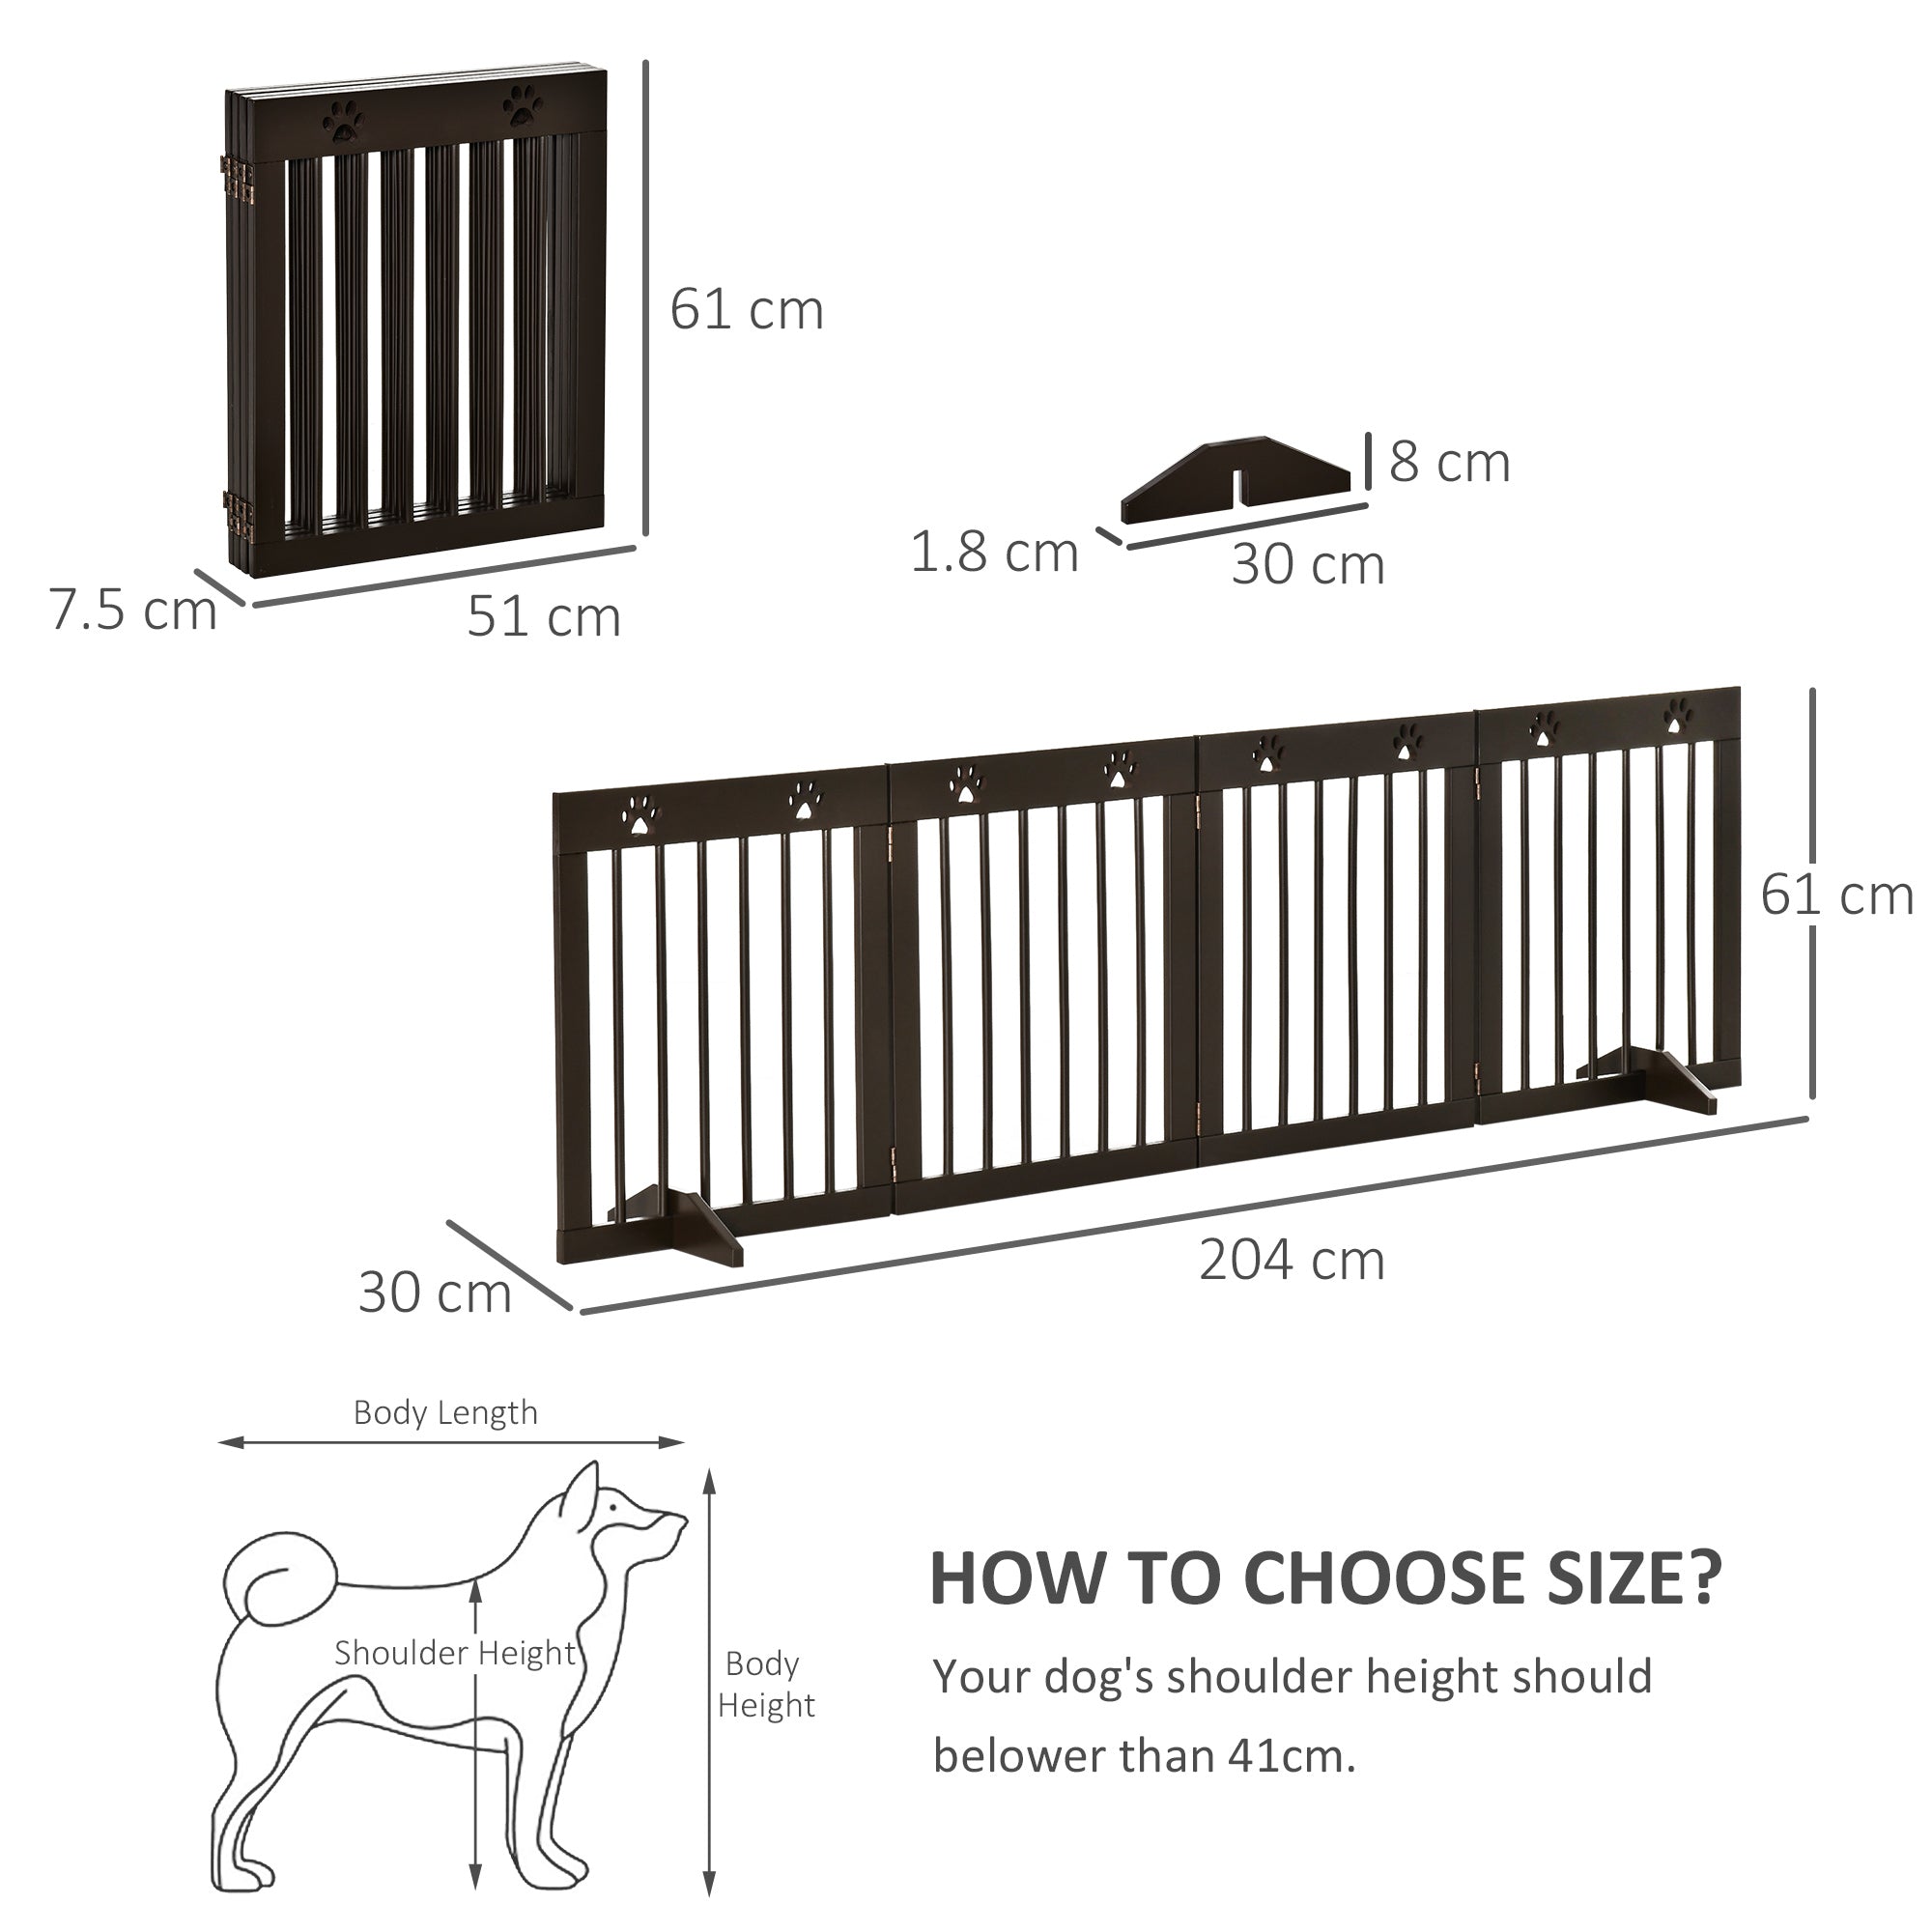 PawHut Freestanding Pet Gate 4 Panel Wooden Dog Barrier Folding Safety Fence with Support Feet up to 204cm Long 61cm Tall for Doorway Stairs Brown - Inspirely